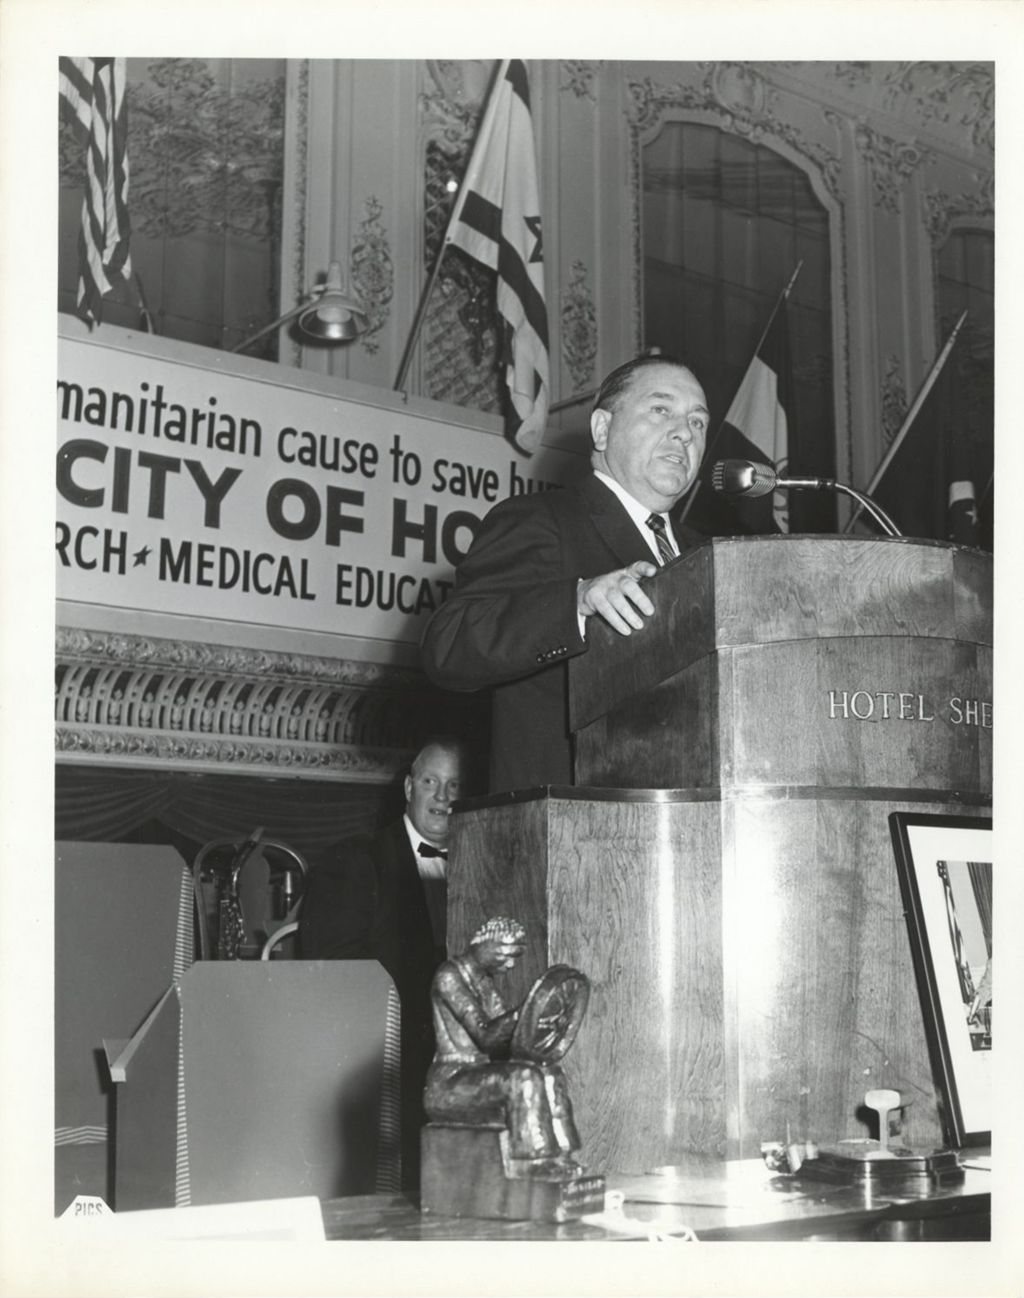 Miniature of Richard J. Daley speaking at City of Hope event